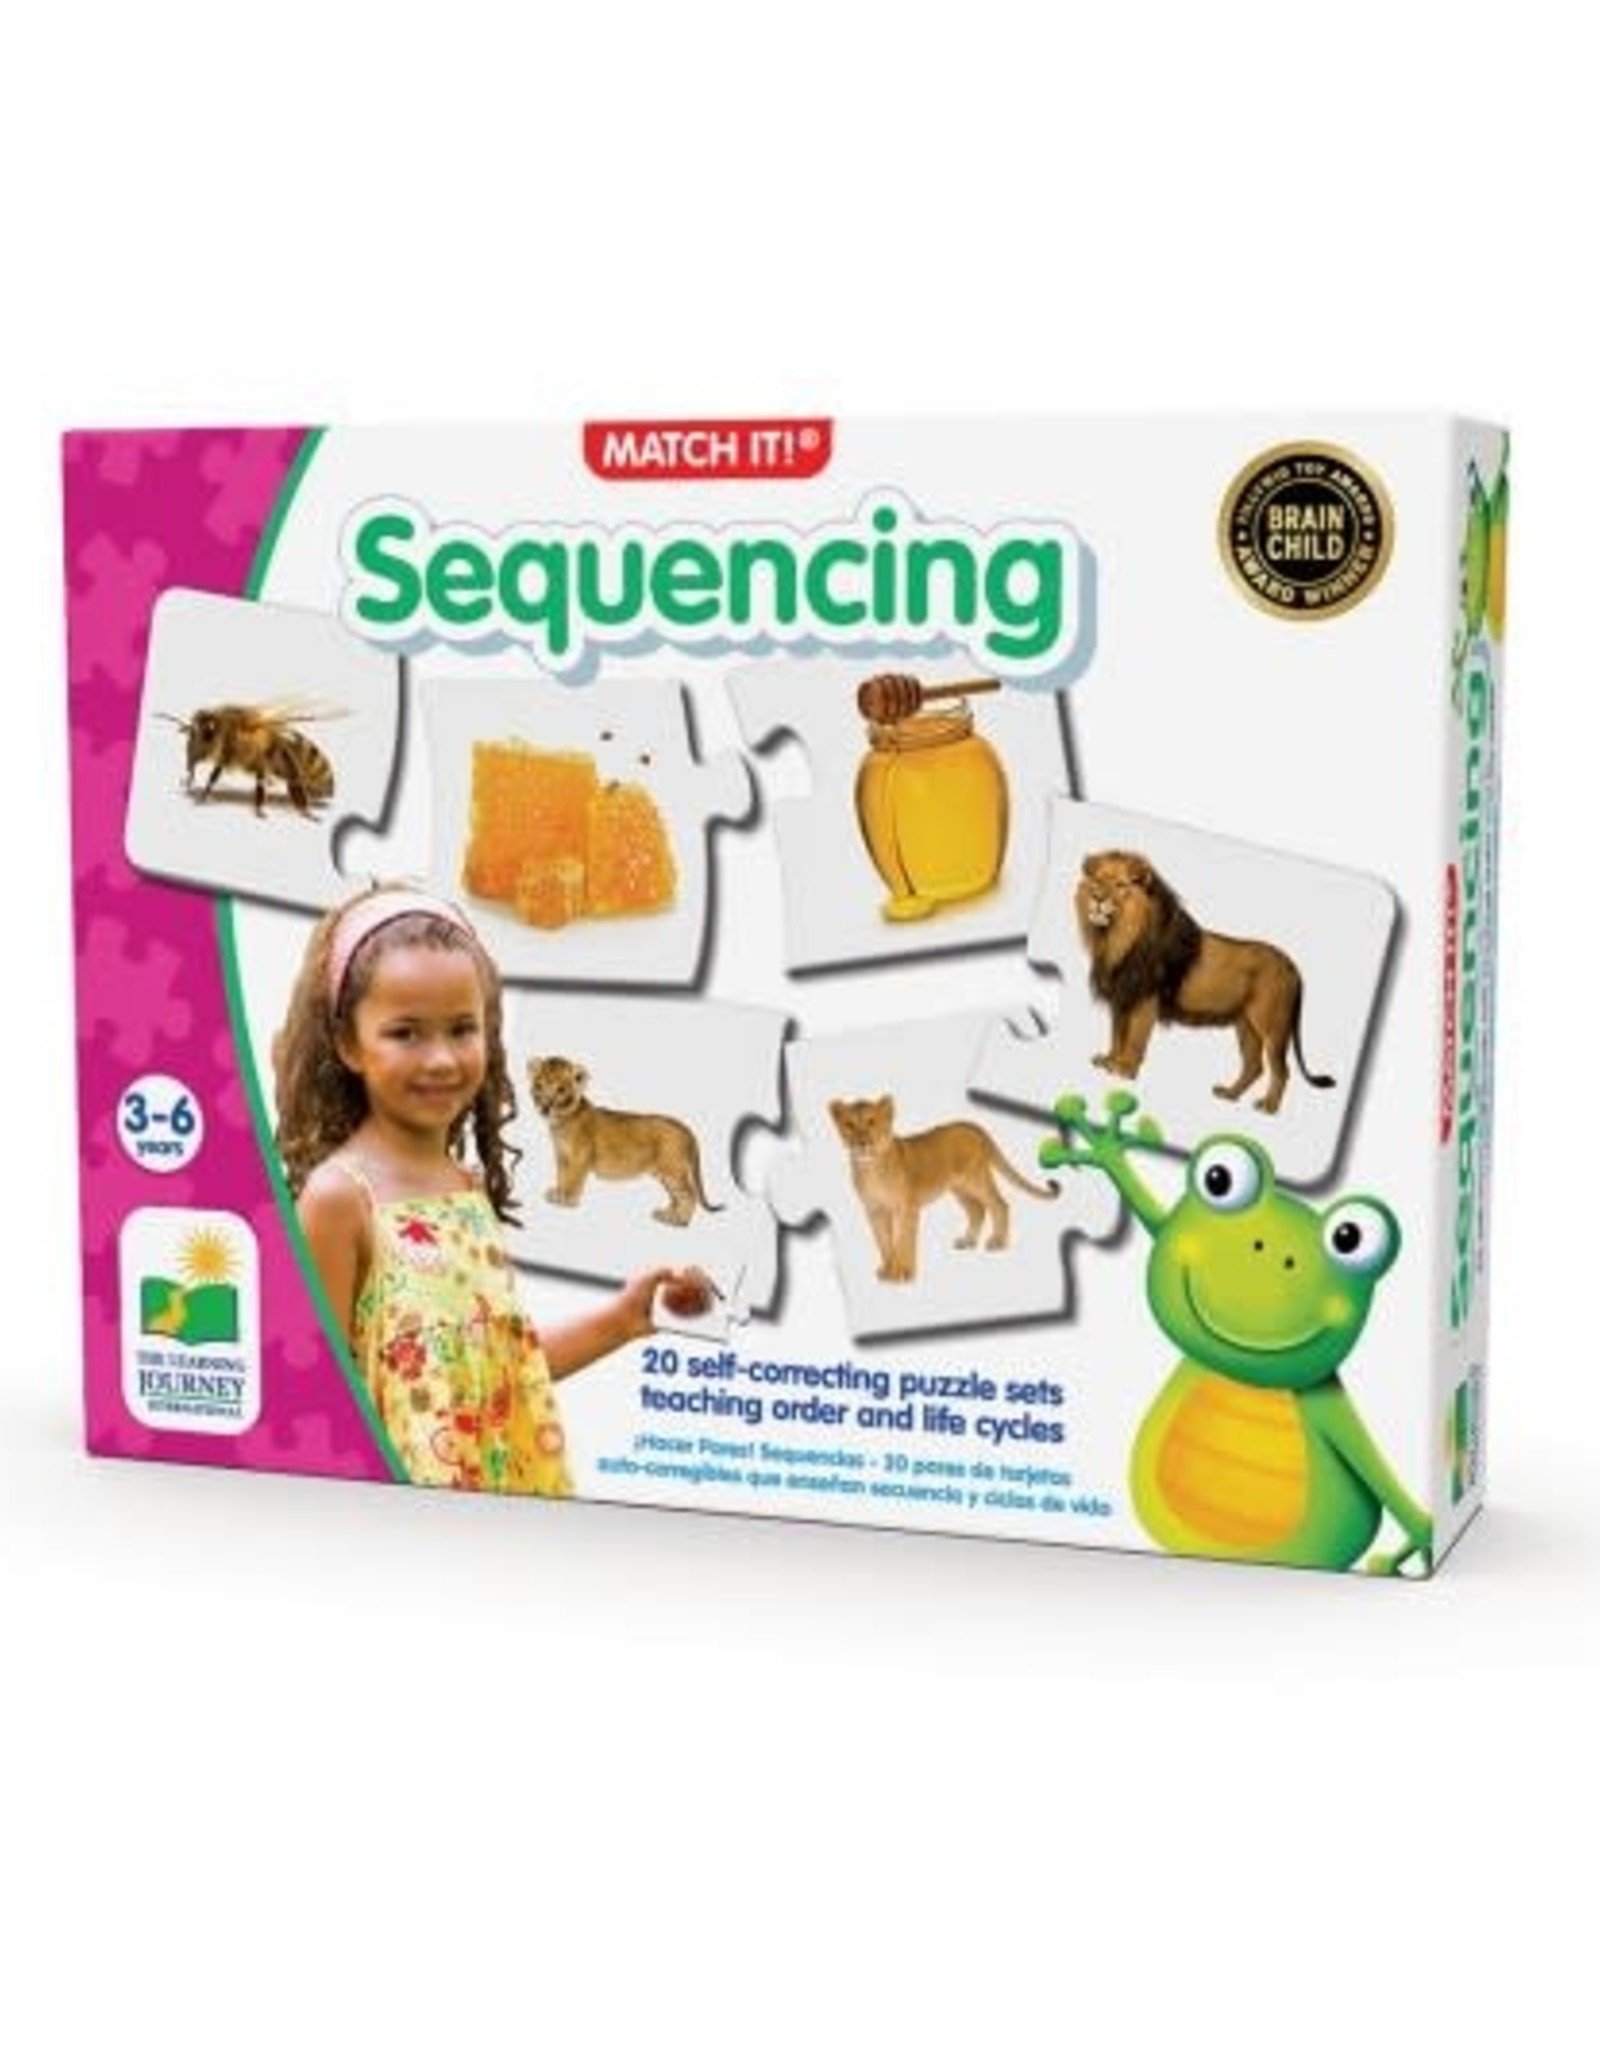 The Learning Journey Match It! Sequencing